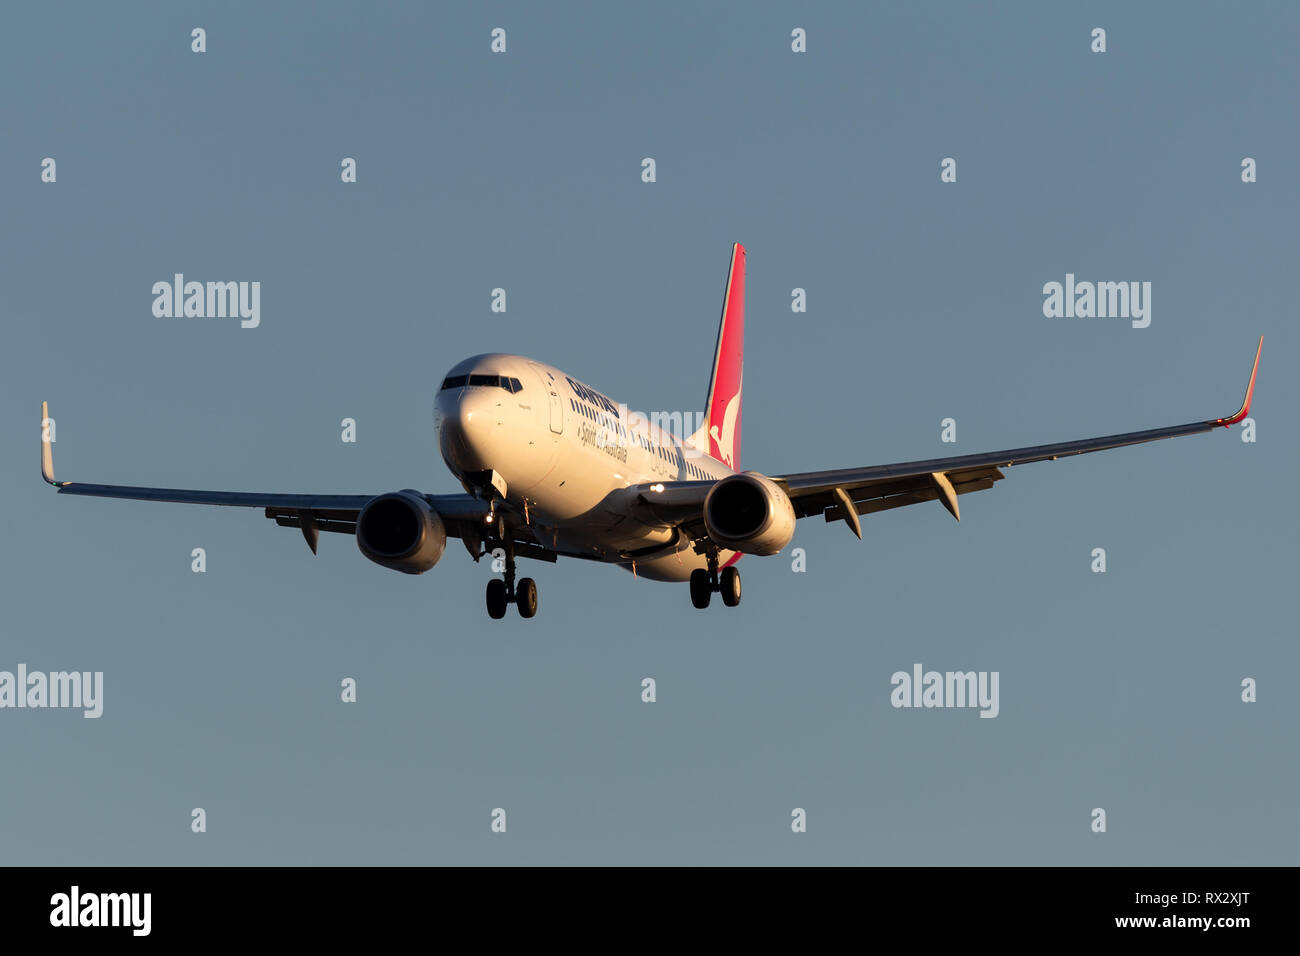 Qantas Boeing 737 aircraft on approach to land at Adelaide Airport. Stock Photo